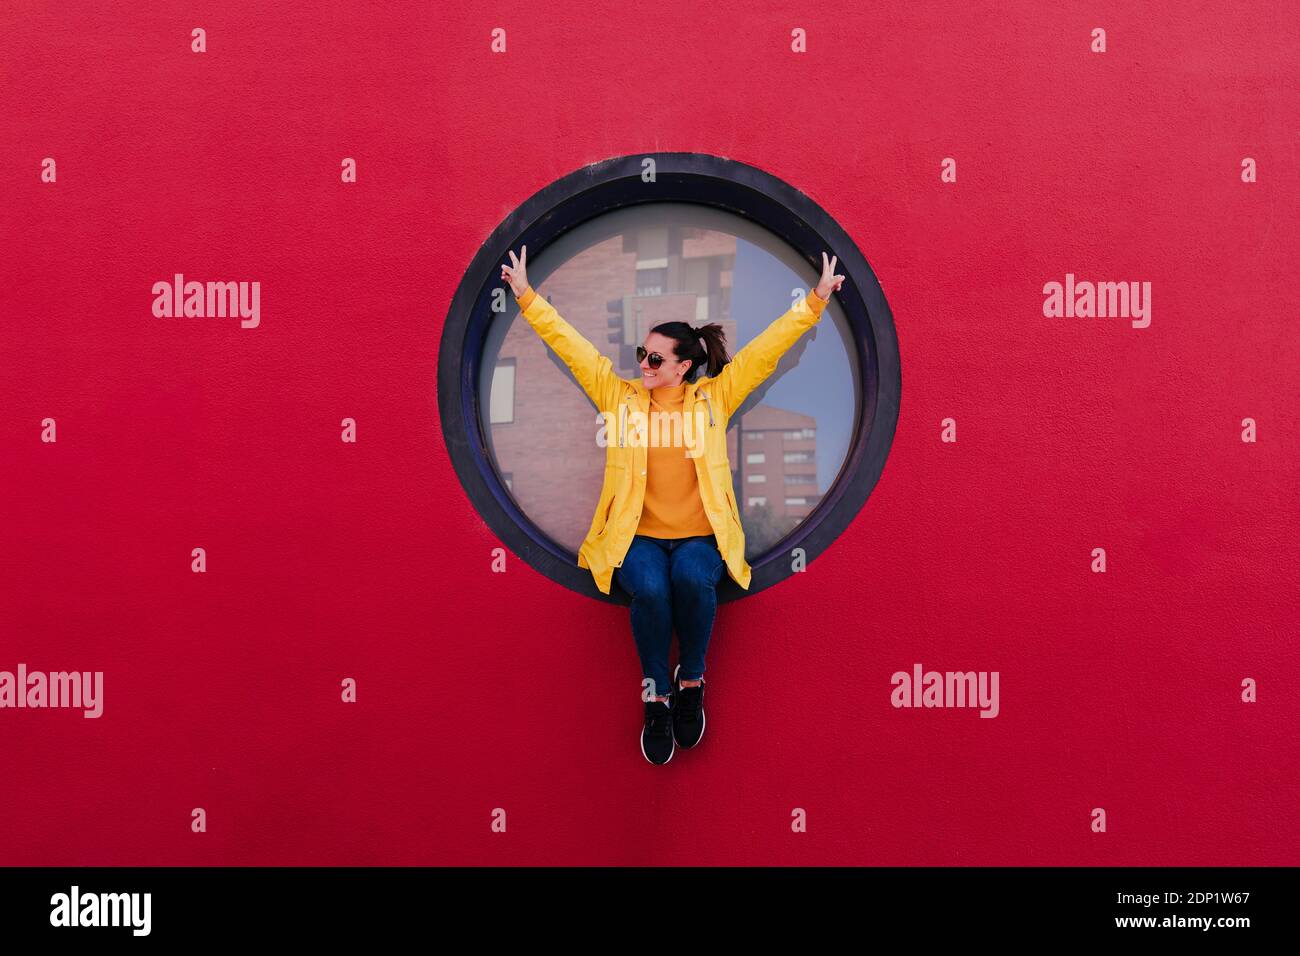 Woman in yellow raincoat sitting in porthole in red wall making victory sign Stock Photo